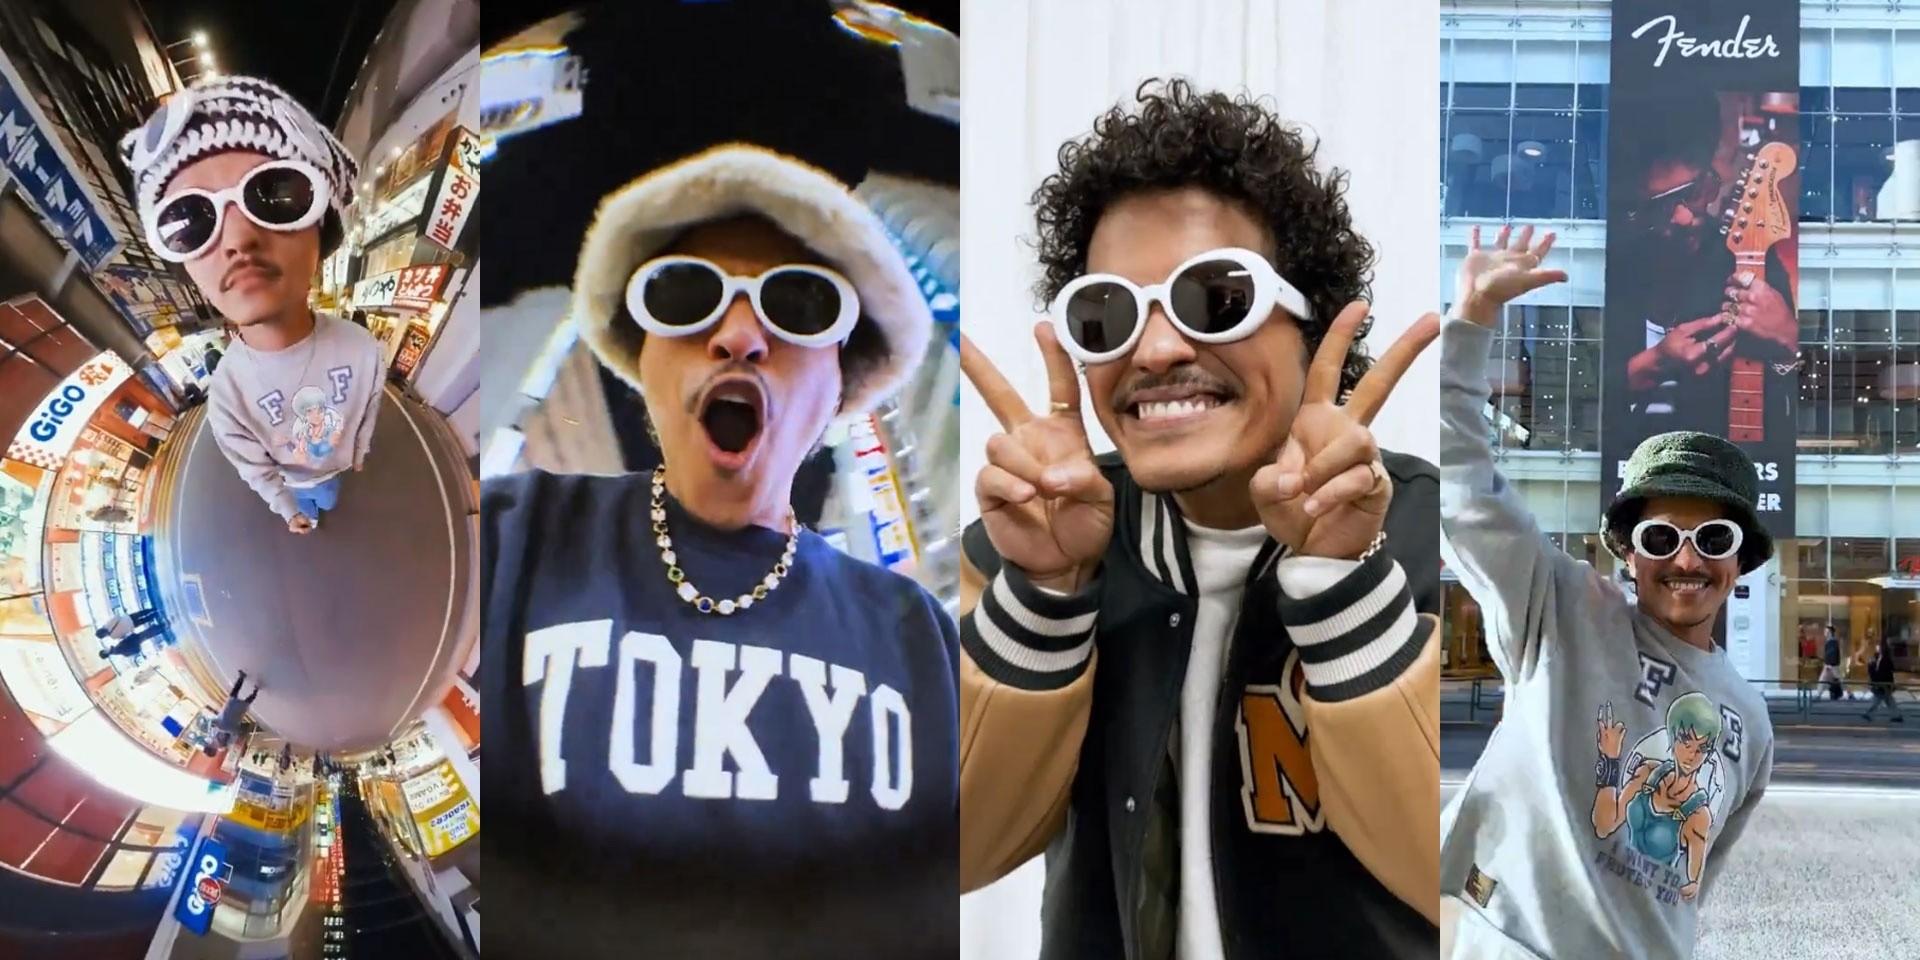 Bruno Mars runs the streets of Tokyo as the "Kawaii King" in new clip: "What a magical place"